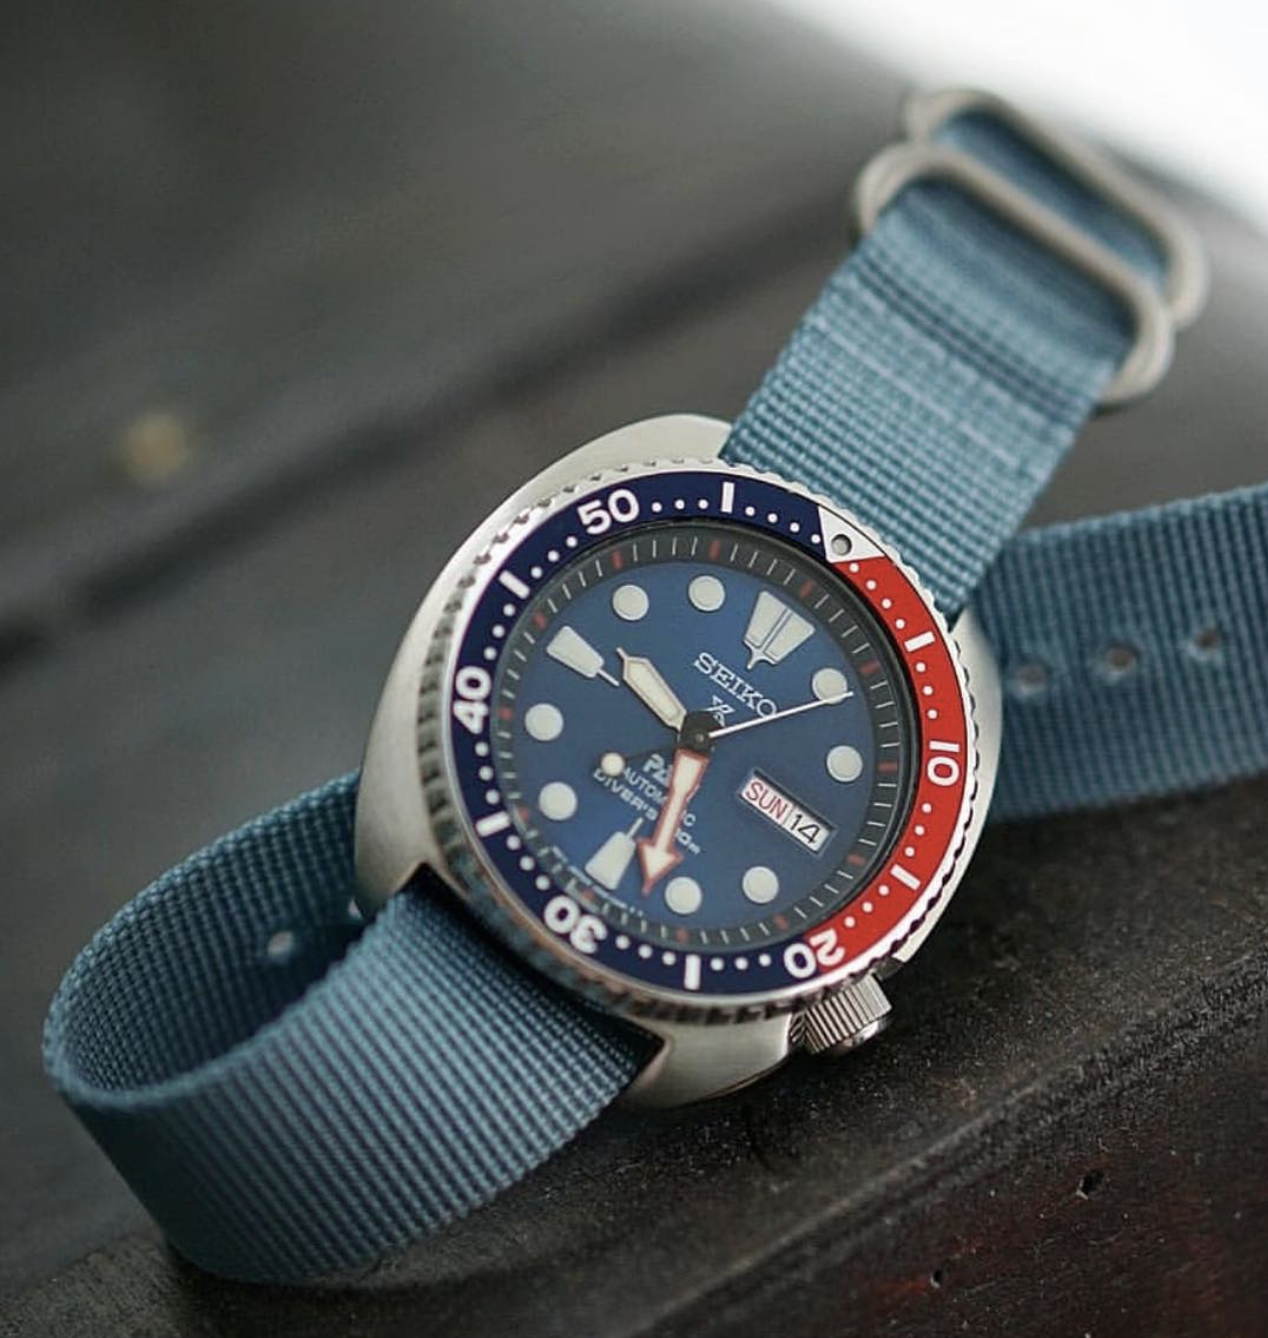 ICONS: Seiko Turtle combines bullet-proof reliability with a bargain price